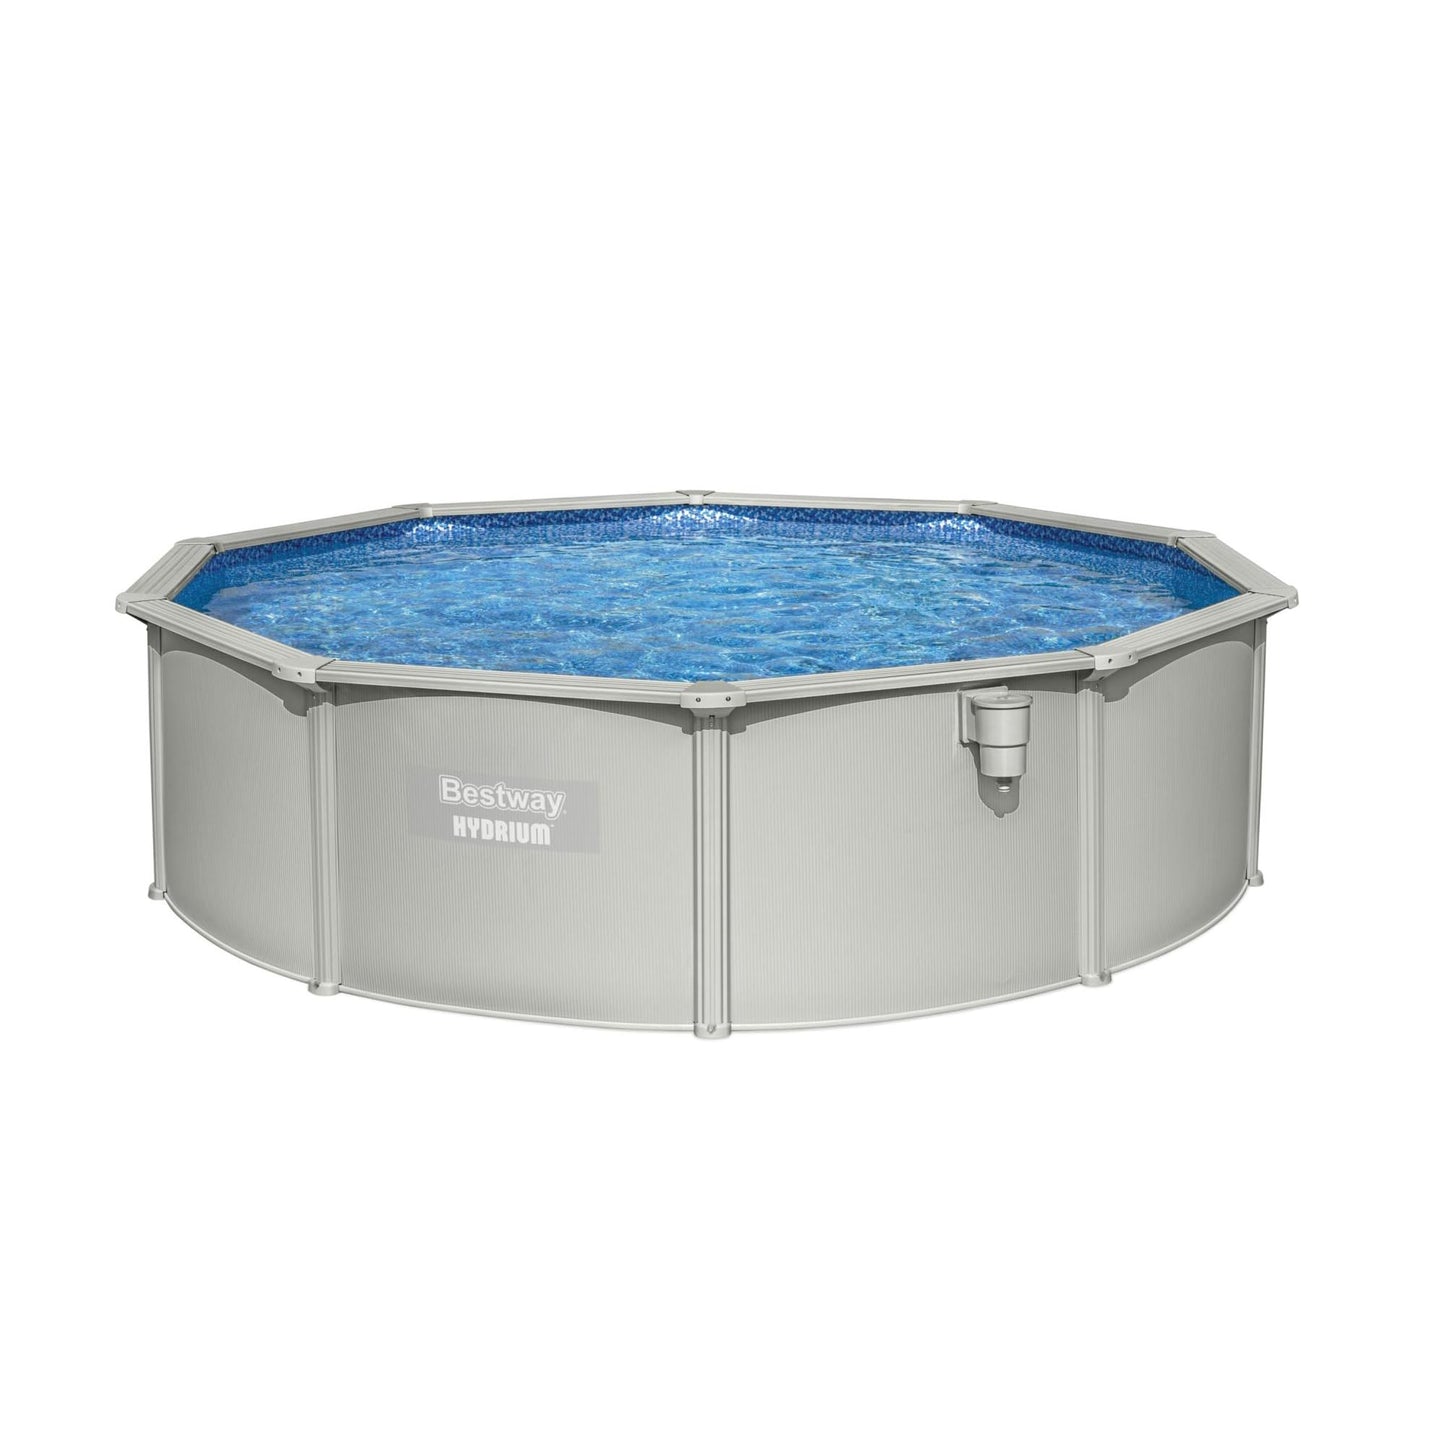 Bestway Hydrium 15'x 48" Steel Wall Above Ground Swimming Pool Set with Accessories, Sand Filter Pump, and Chemical Dispenser, Gray